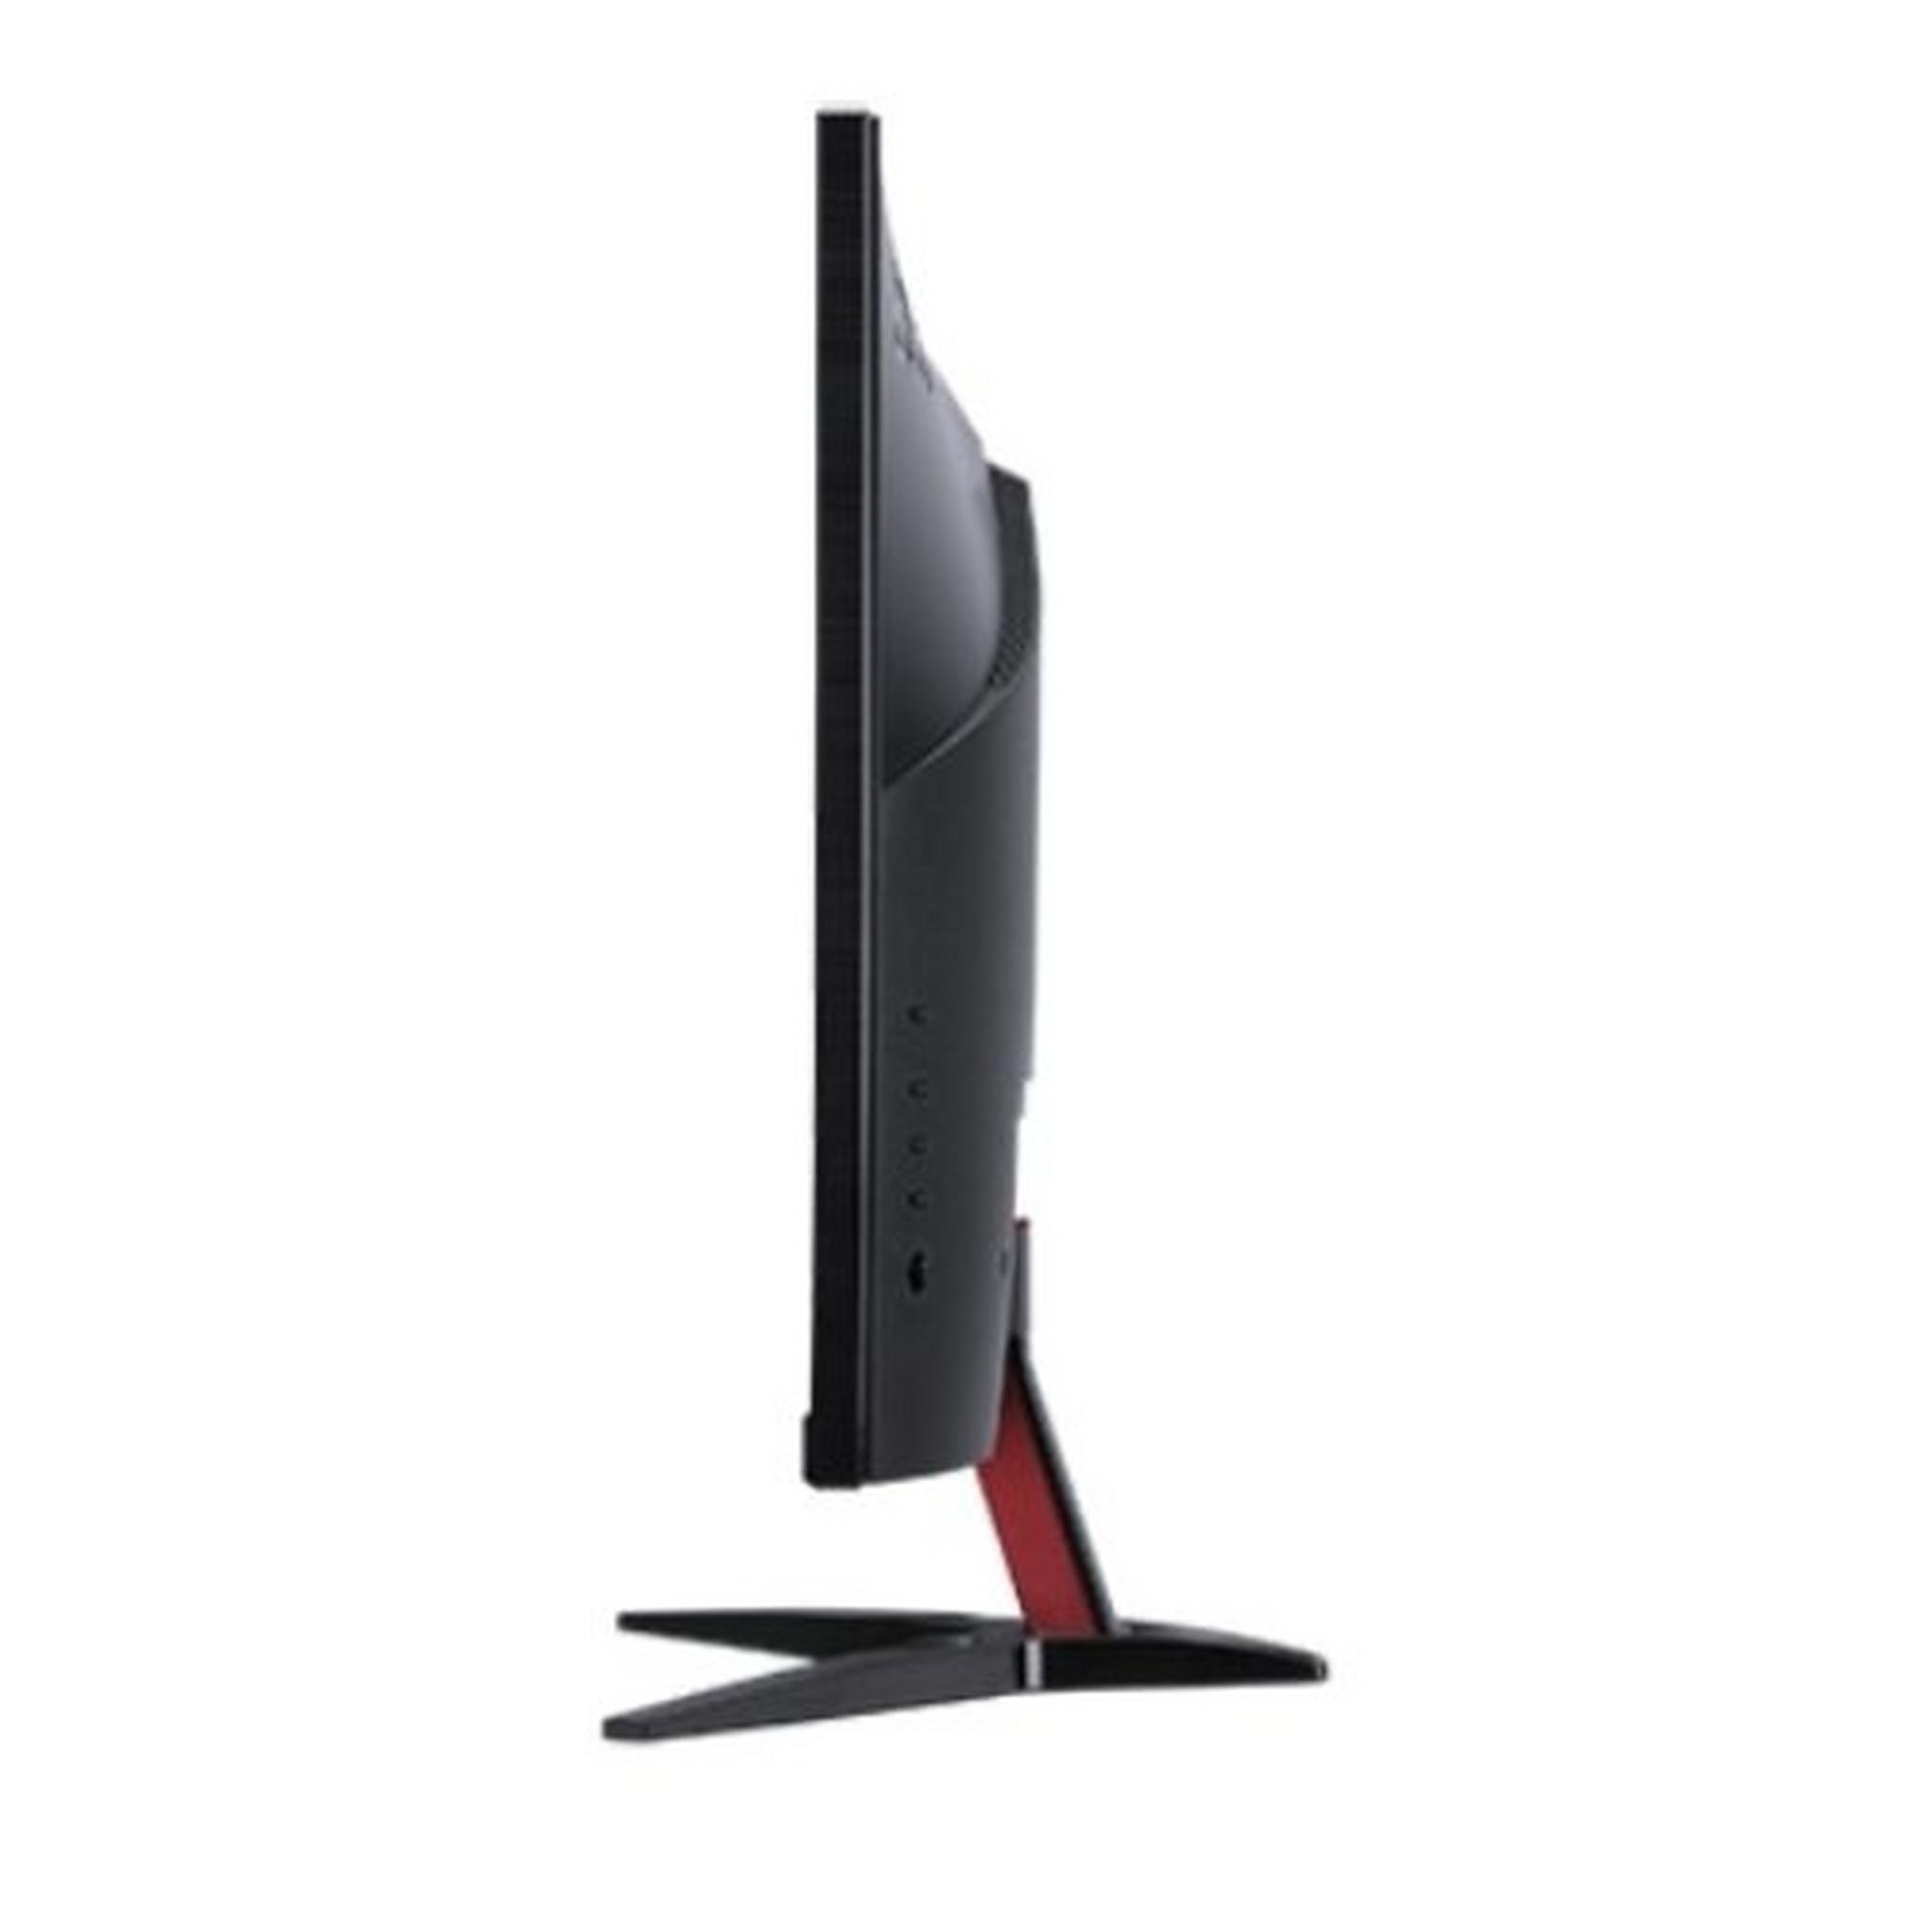 Acer Nitro KG2 27-inch FHD Gaming Monitor (UM.HX2EE.S02)